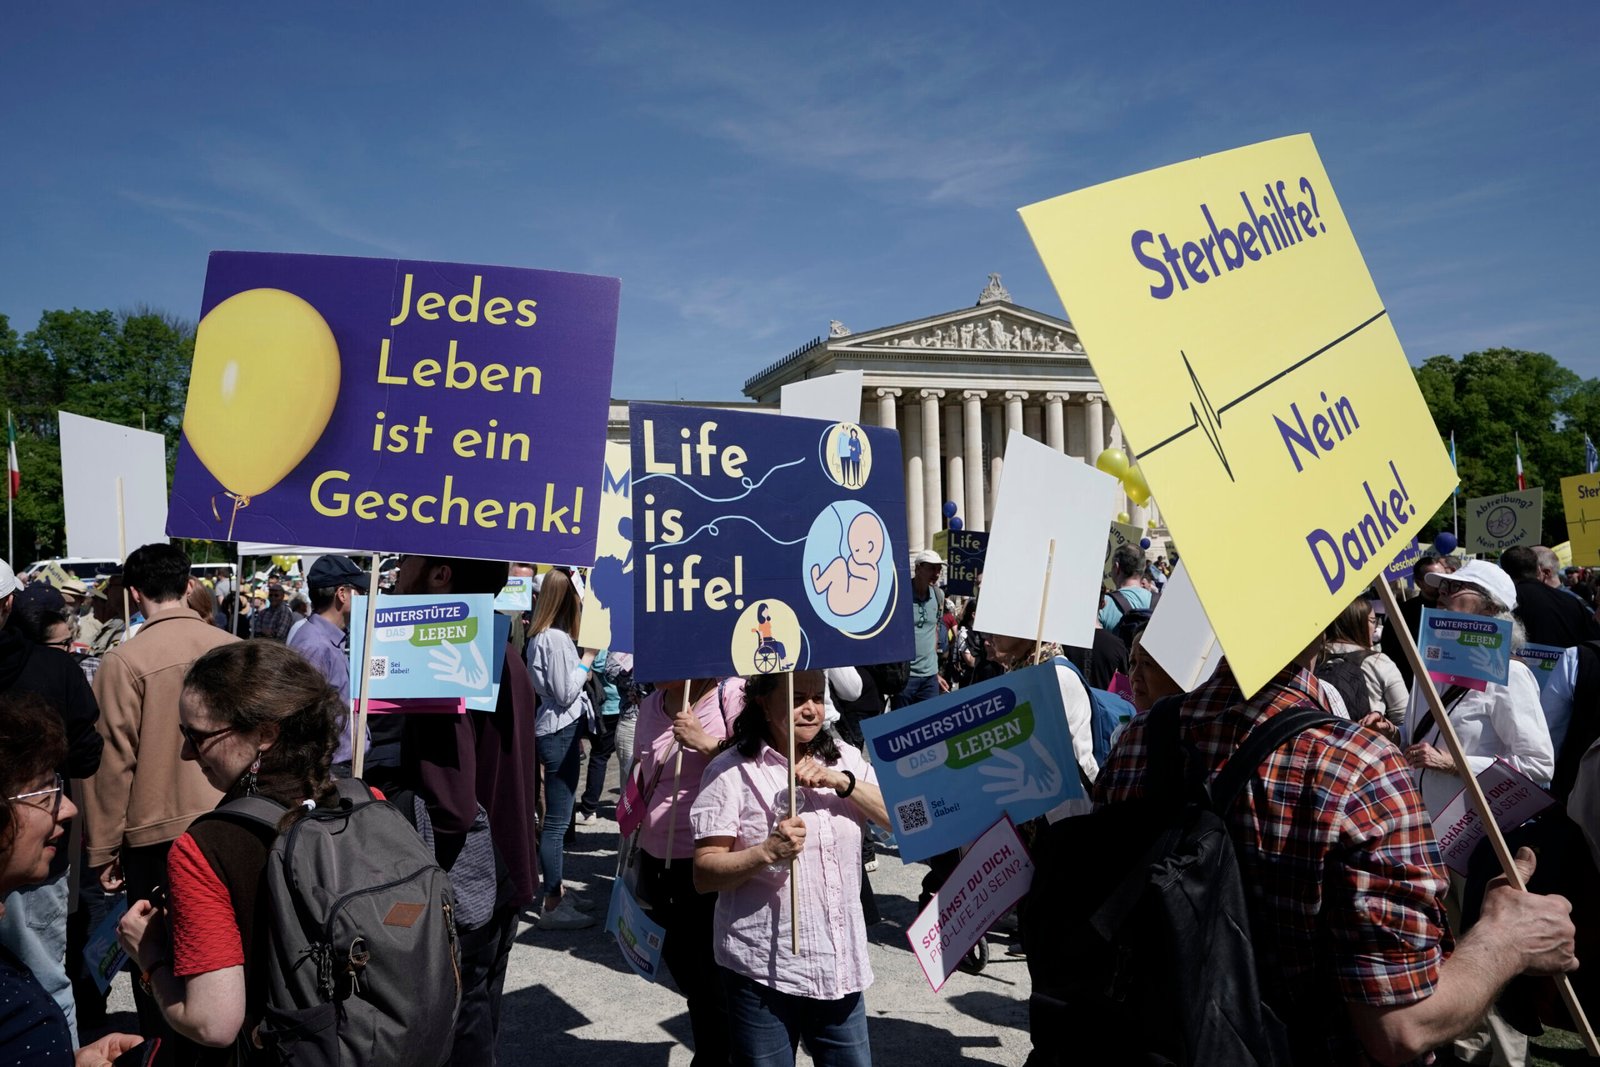 Experts group says abortion in Germany should be decriminalized during pregnancy’s first 12 weeks